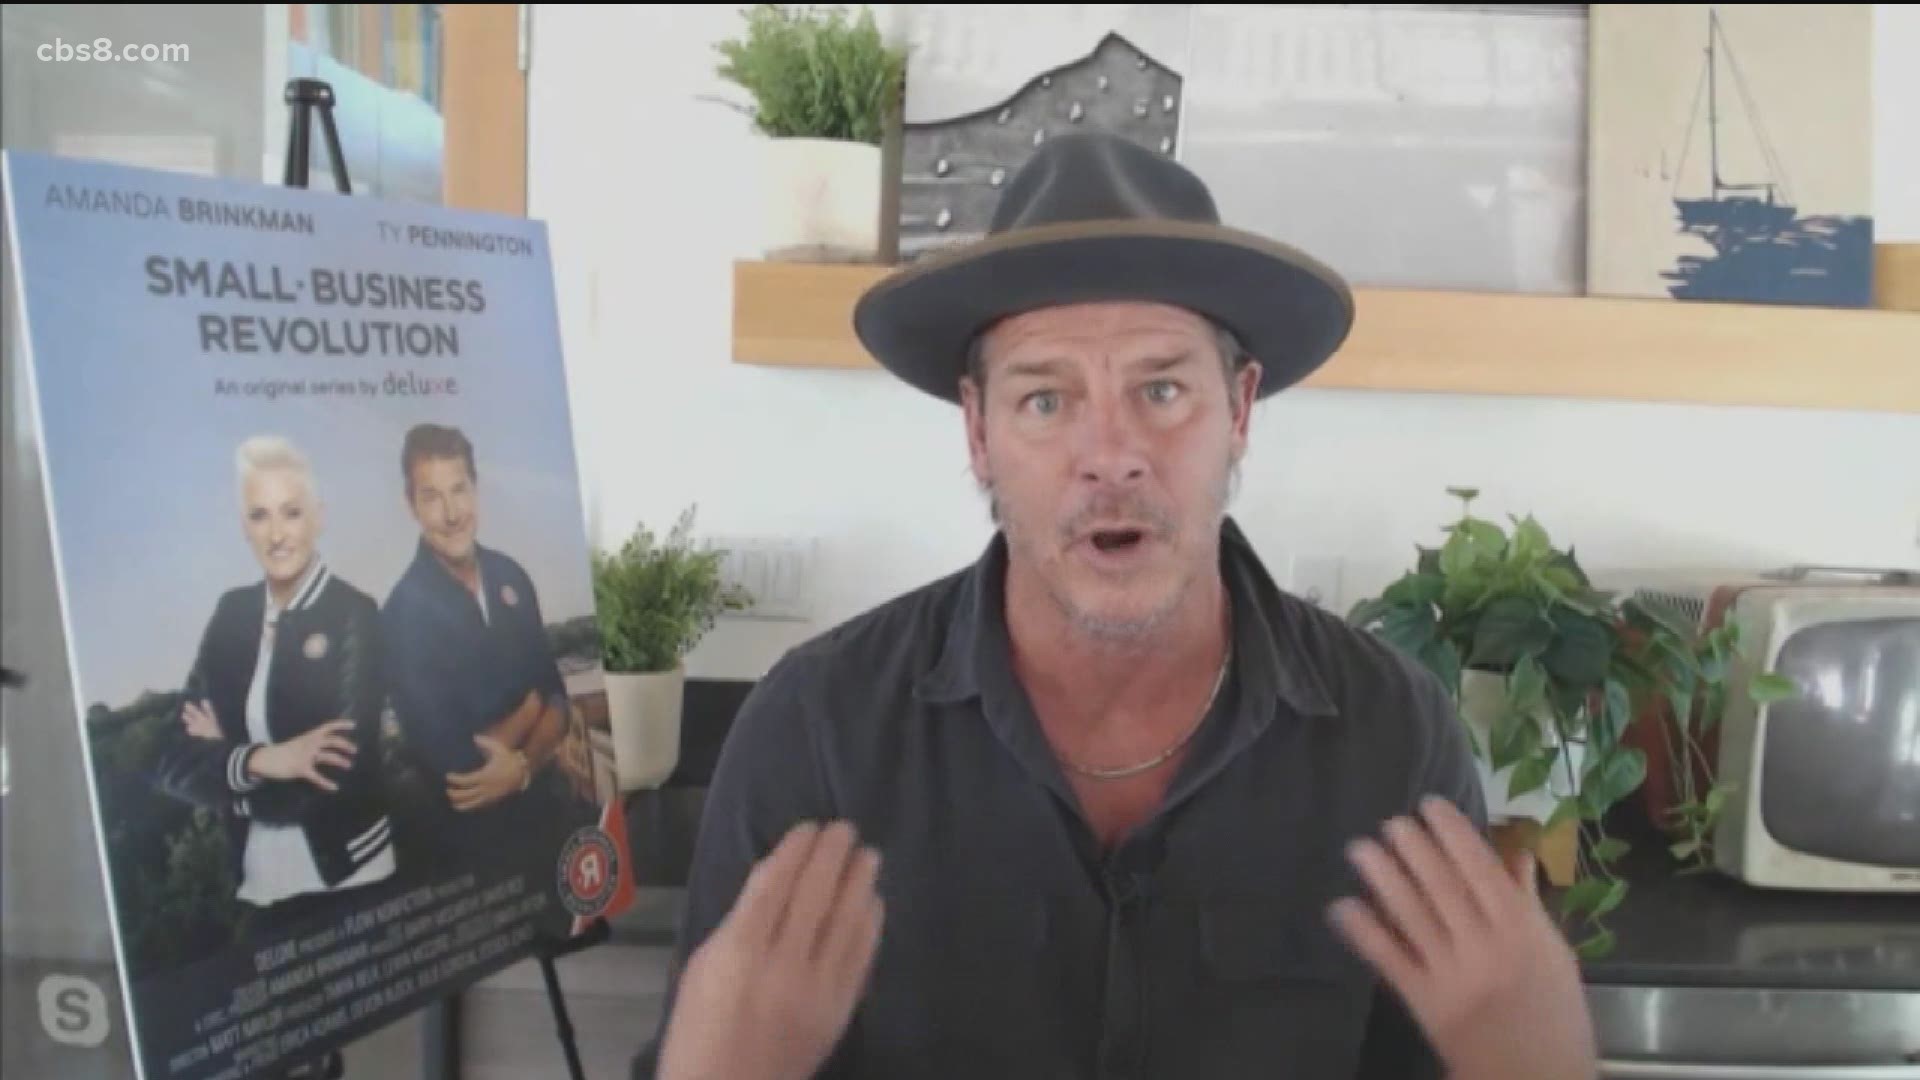 Hosts of the show Amanda Brinkman and Ty Pennington joined The Four to talk about what you can do right now to save your business.